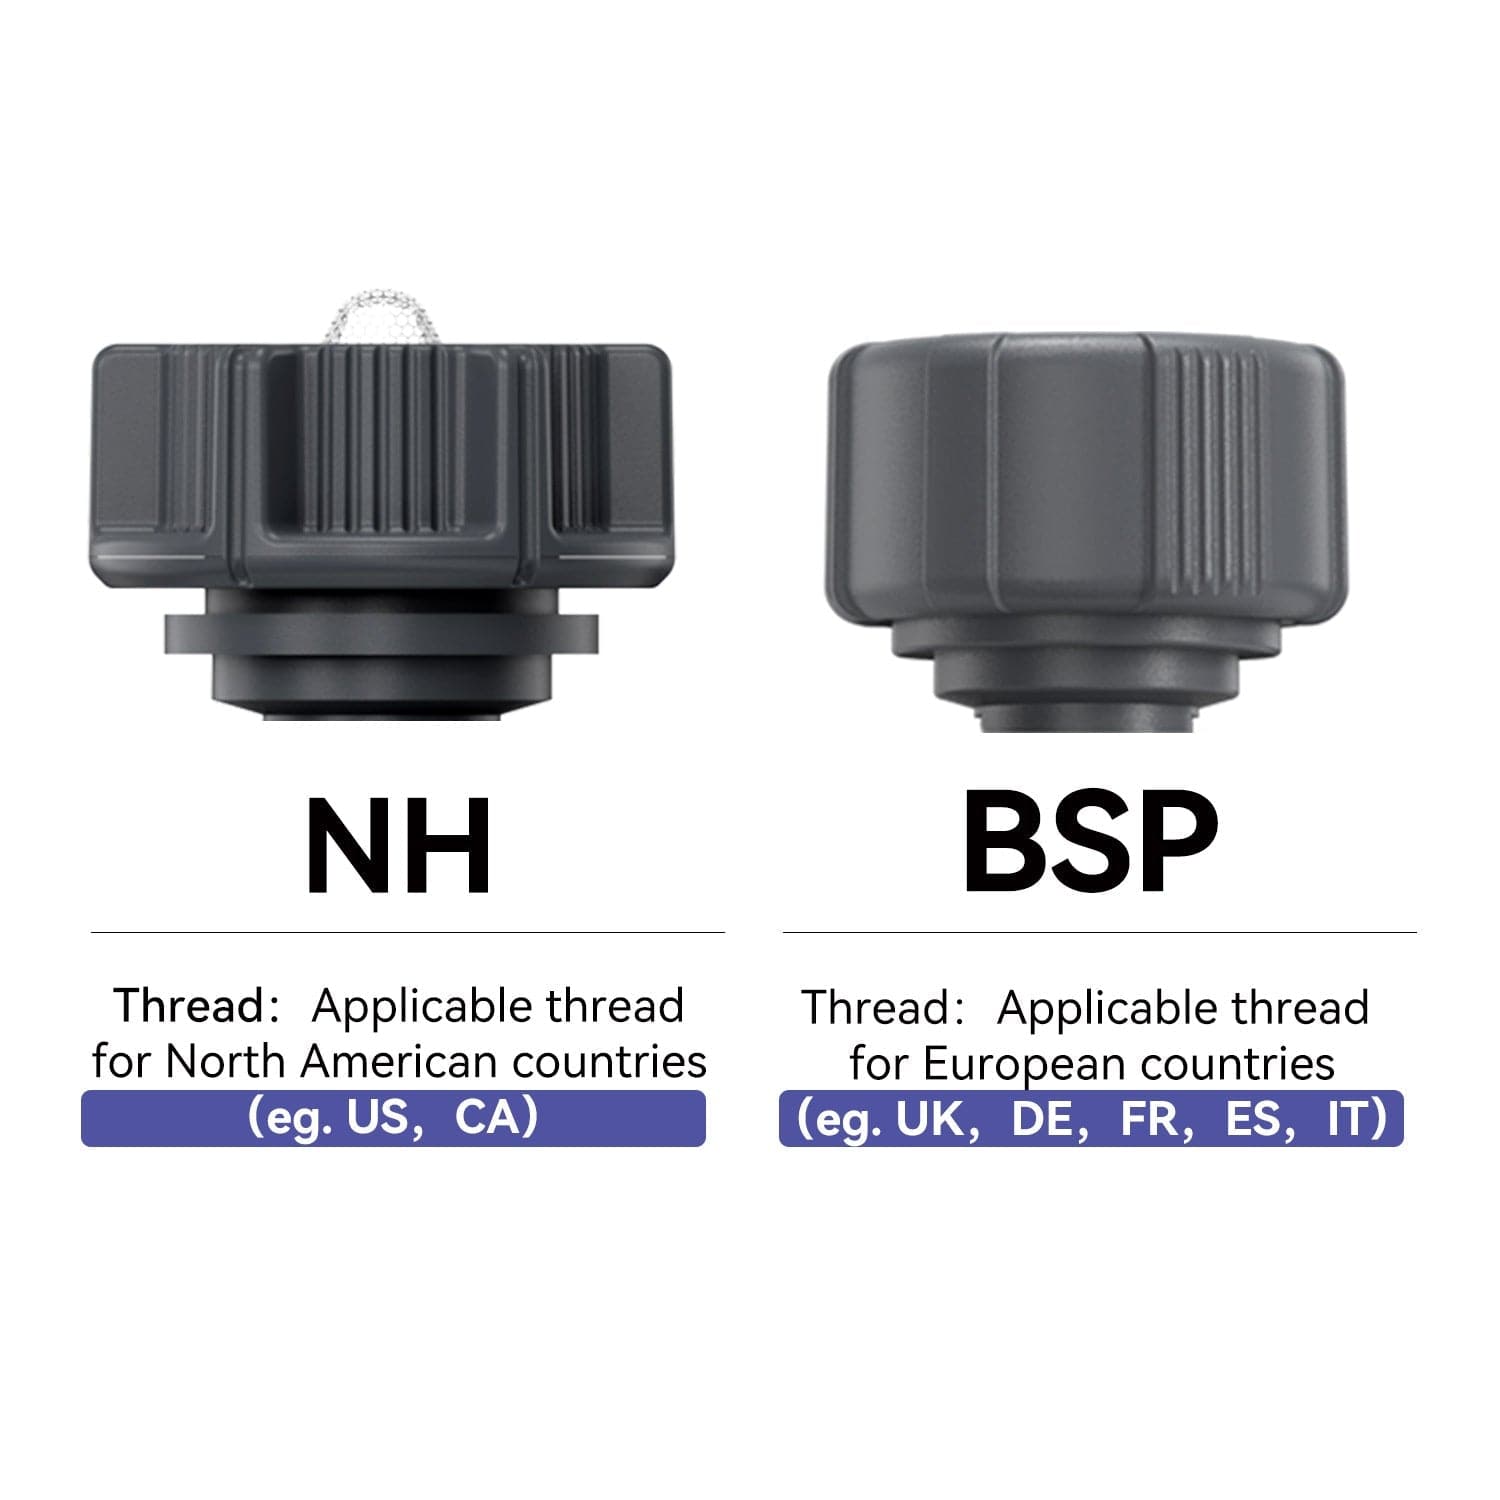 Distinction between NH and BSP threads